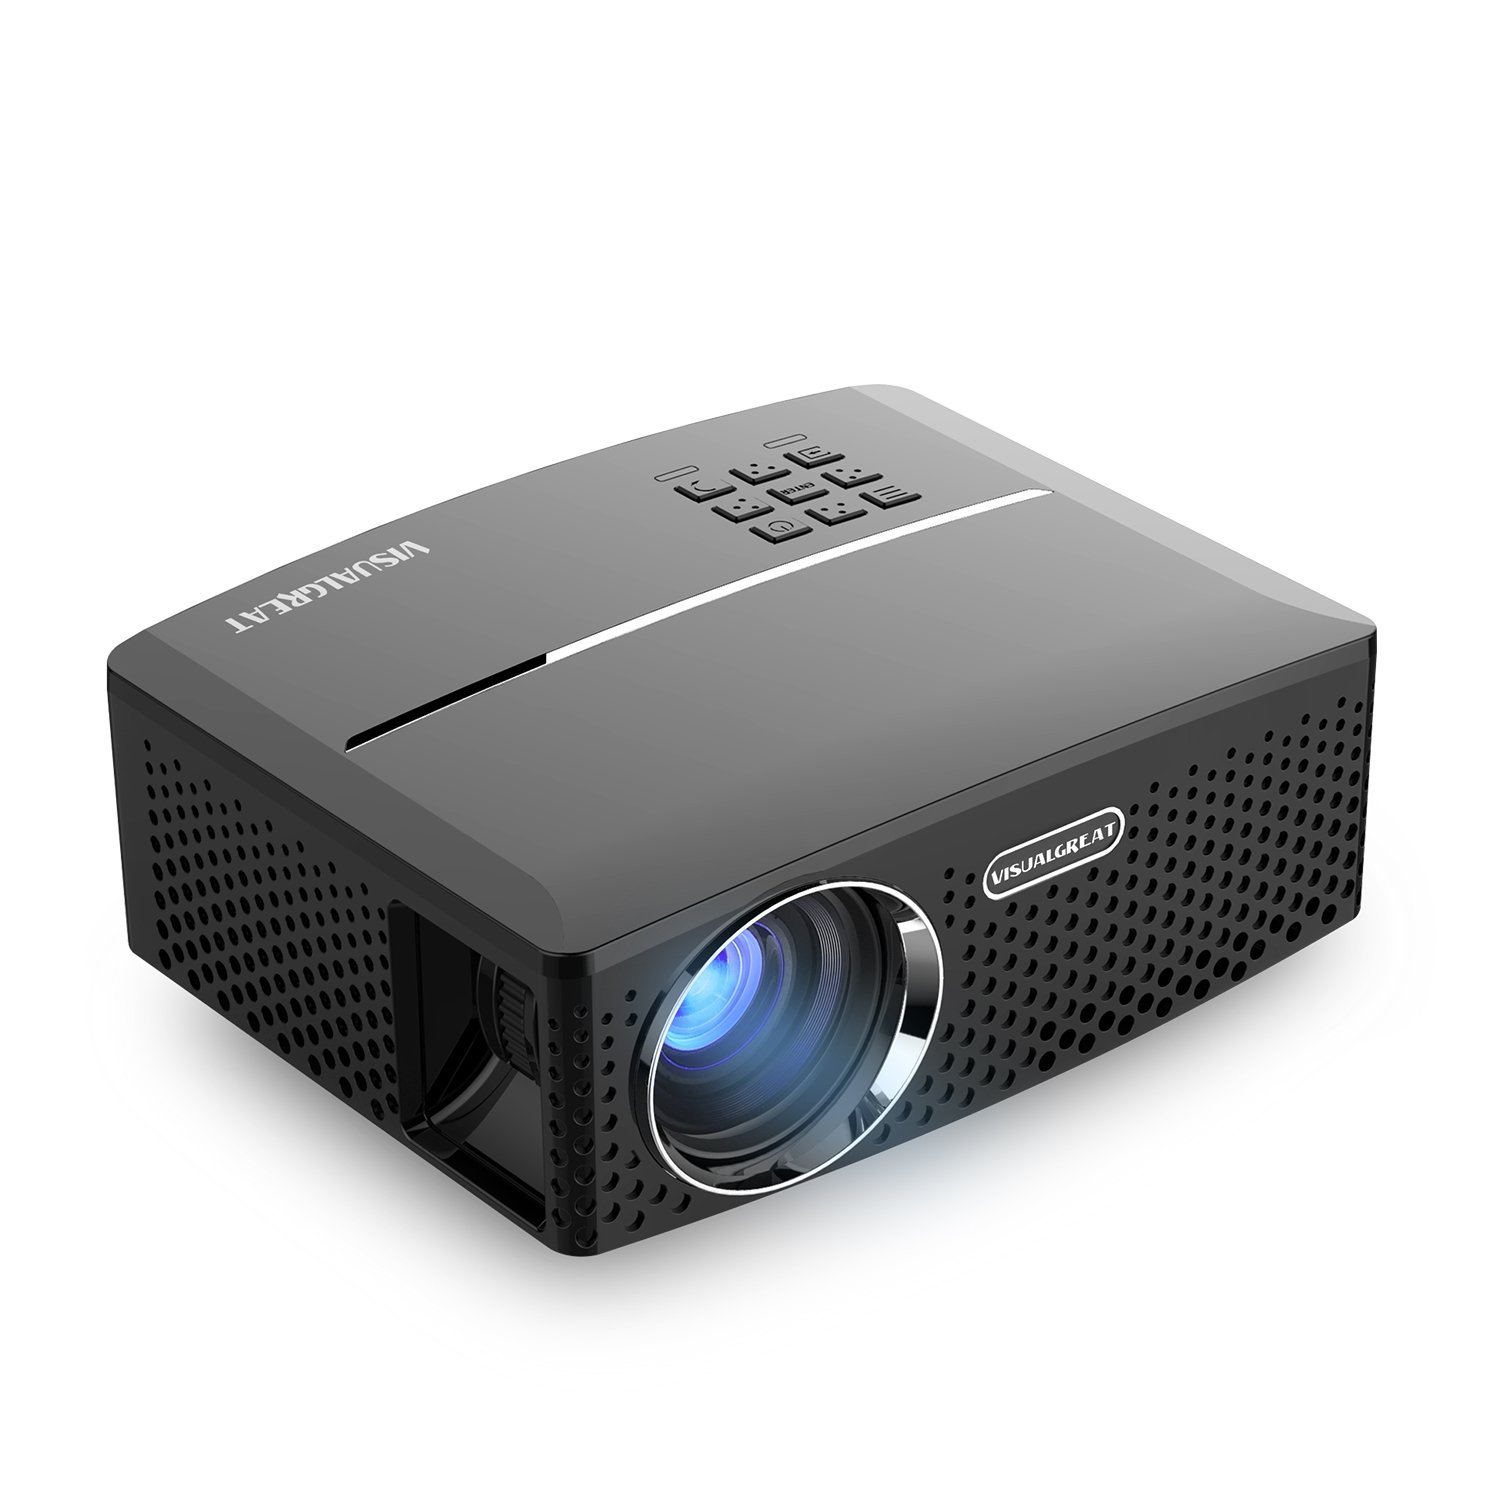 VisualGreat GP80 Projector, Portable Size 2017 Top Game Video Entertainment, Led 1800 Lumens for Home Theater 1080P Read via Double HDMI & USB to Achieve Your Movie at Your Family Party